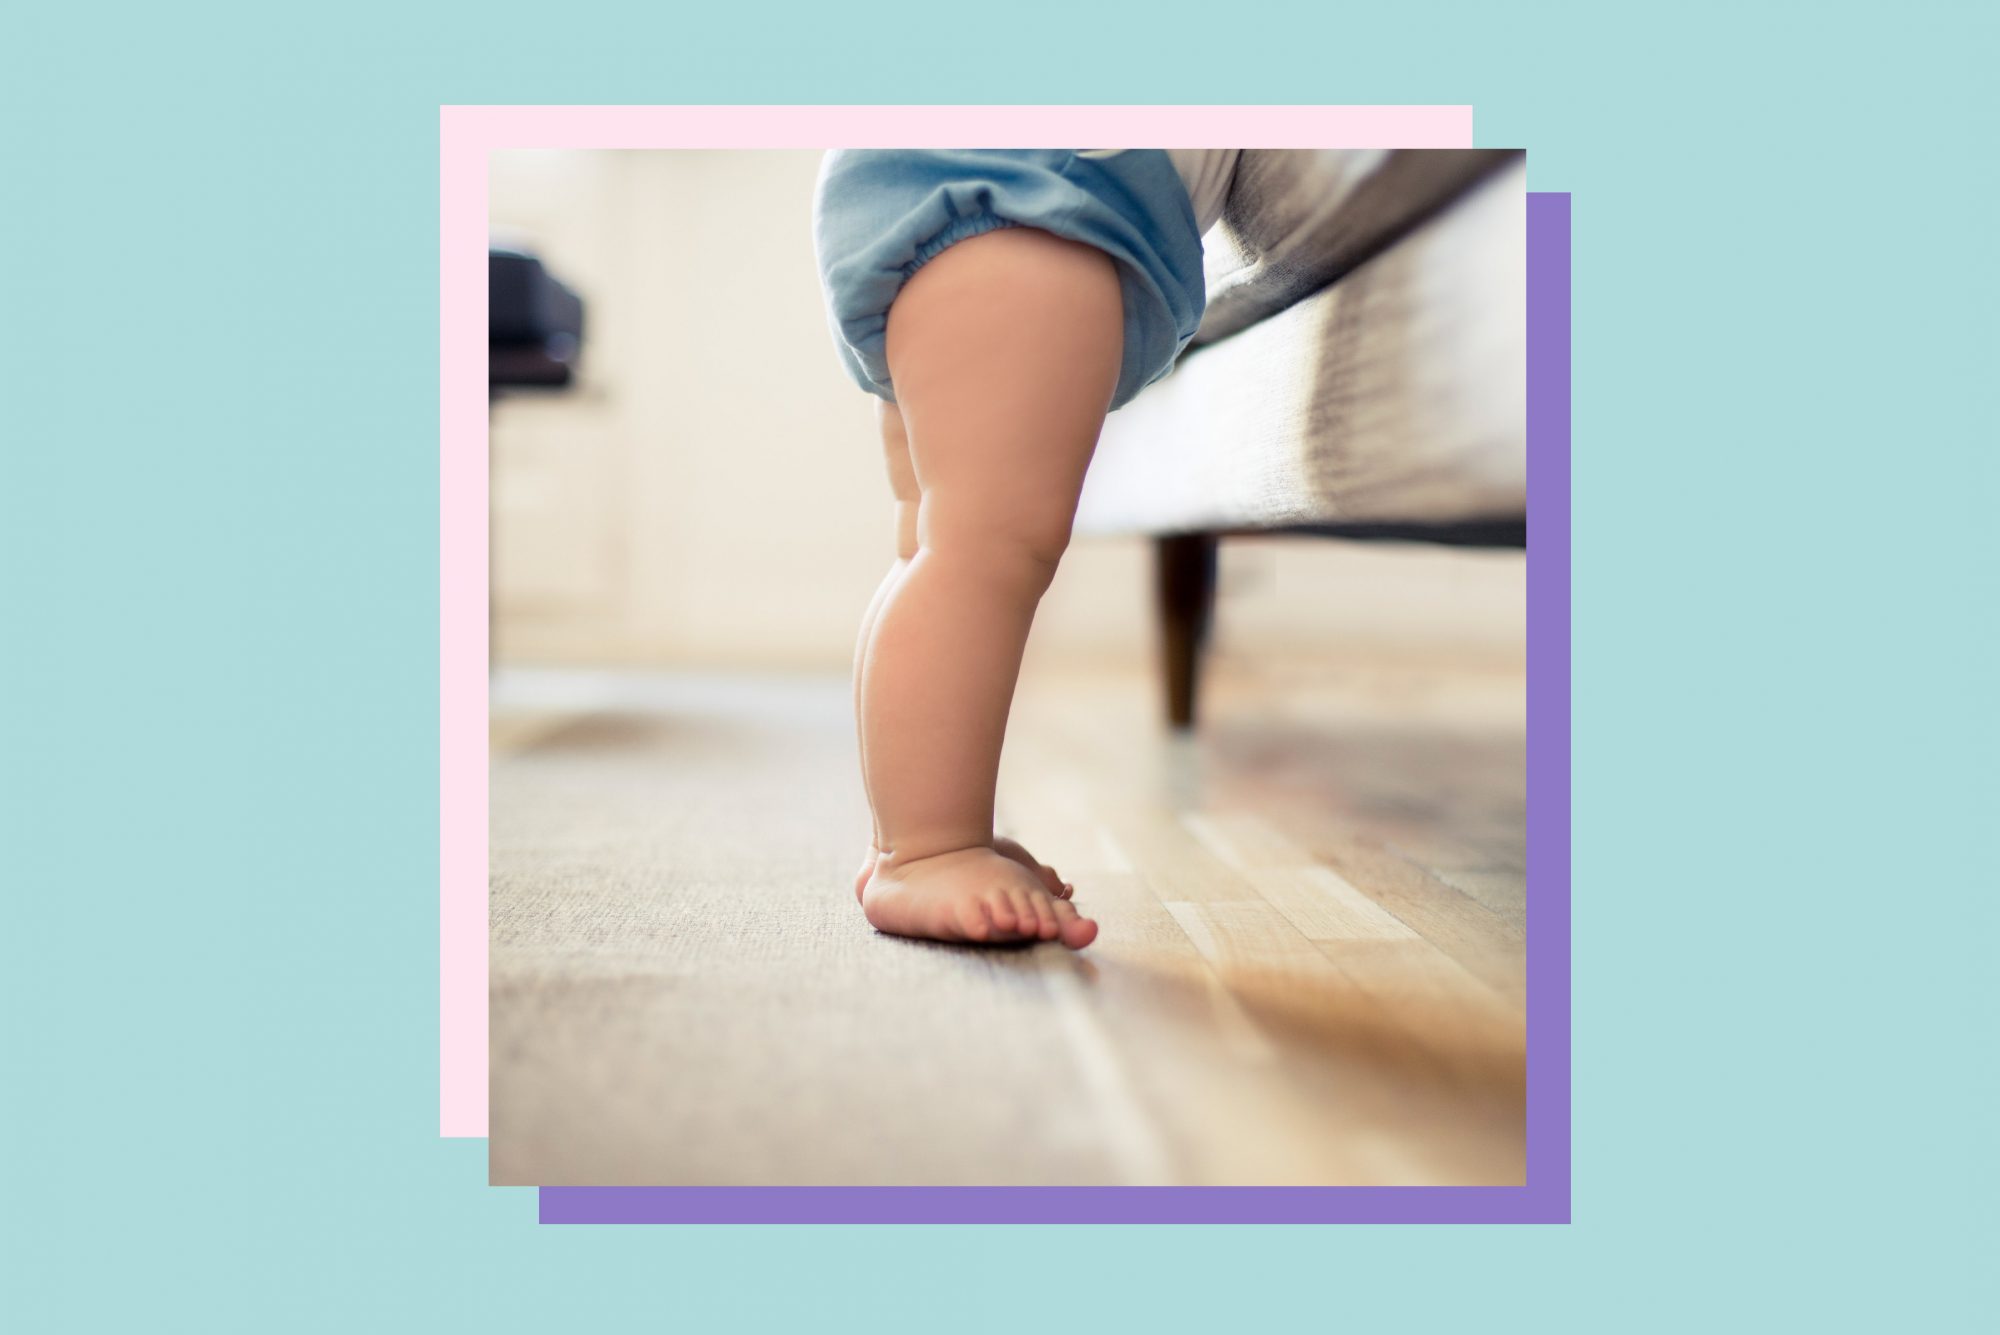 An image of a baby standing by a couch.